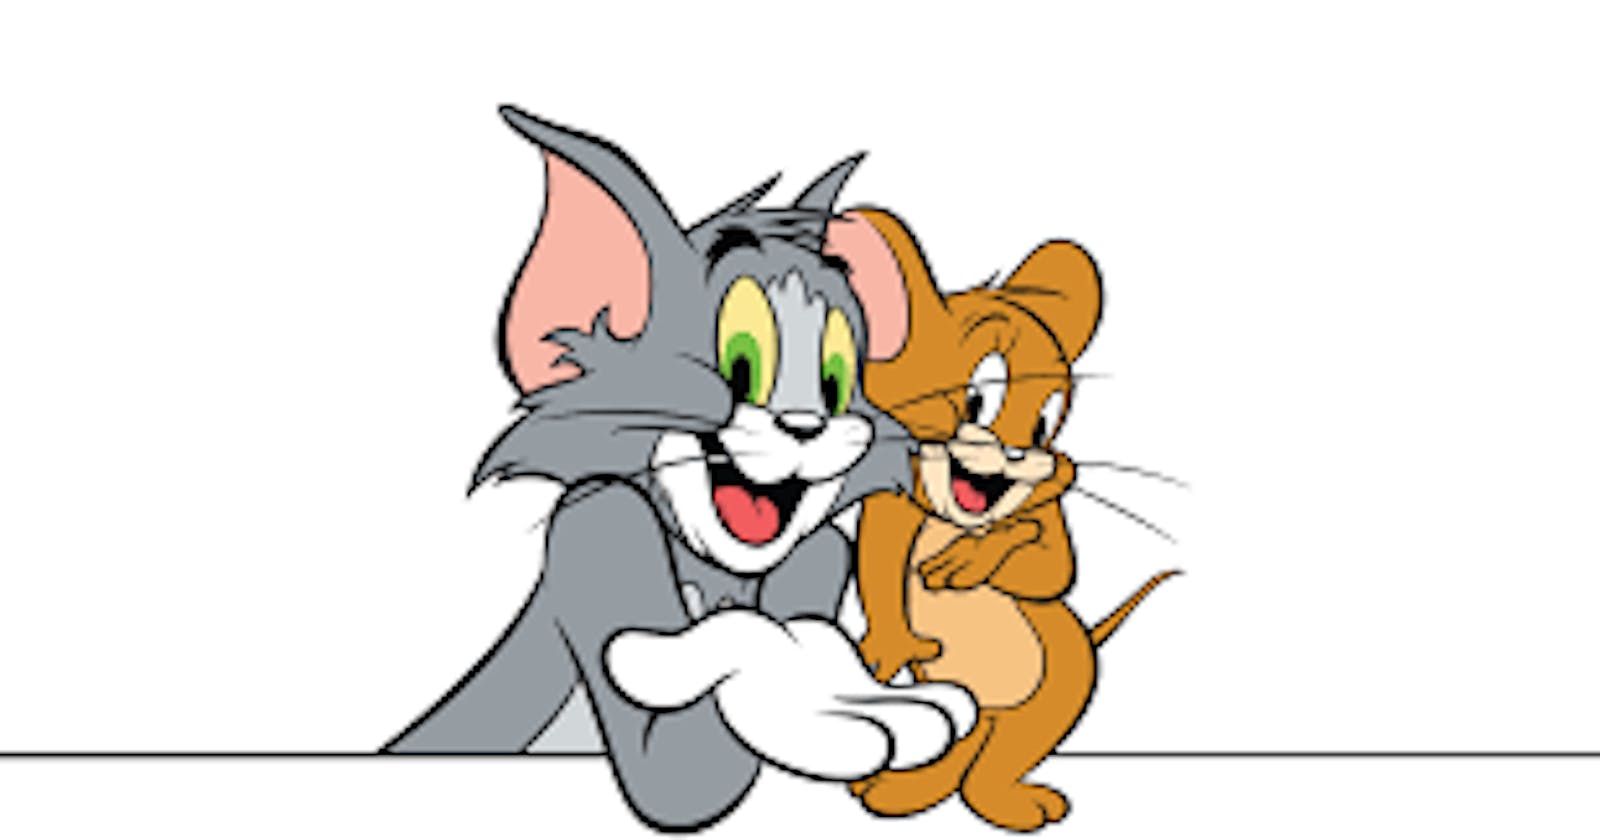 Why Tom never killed Jerry??